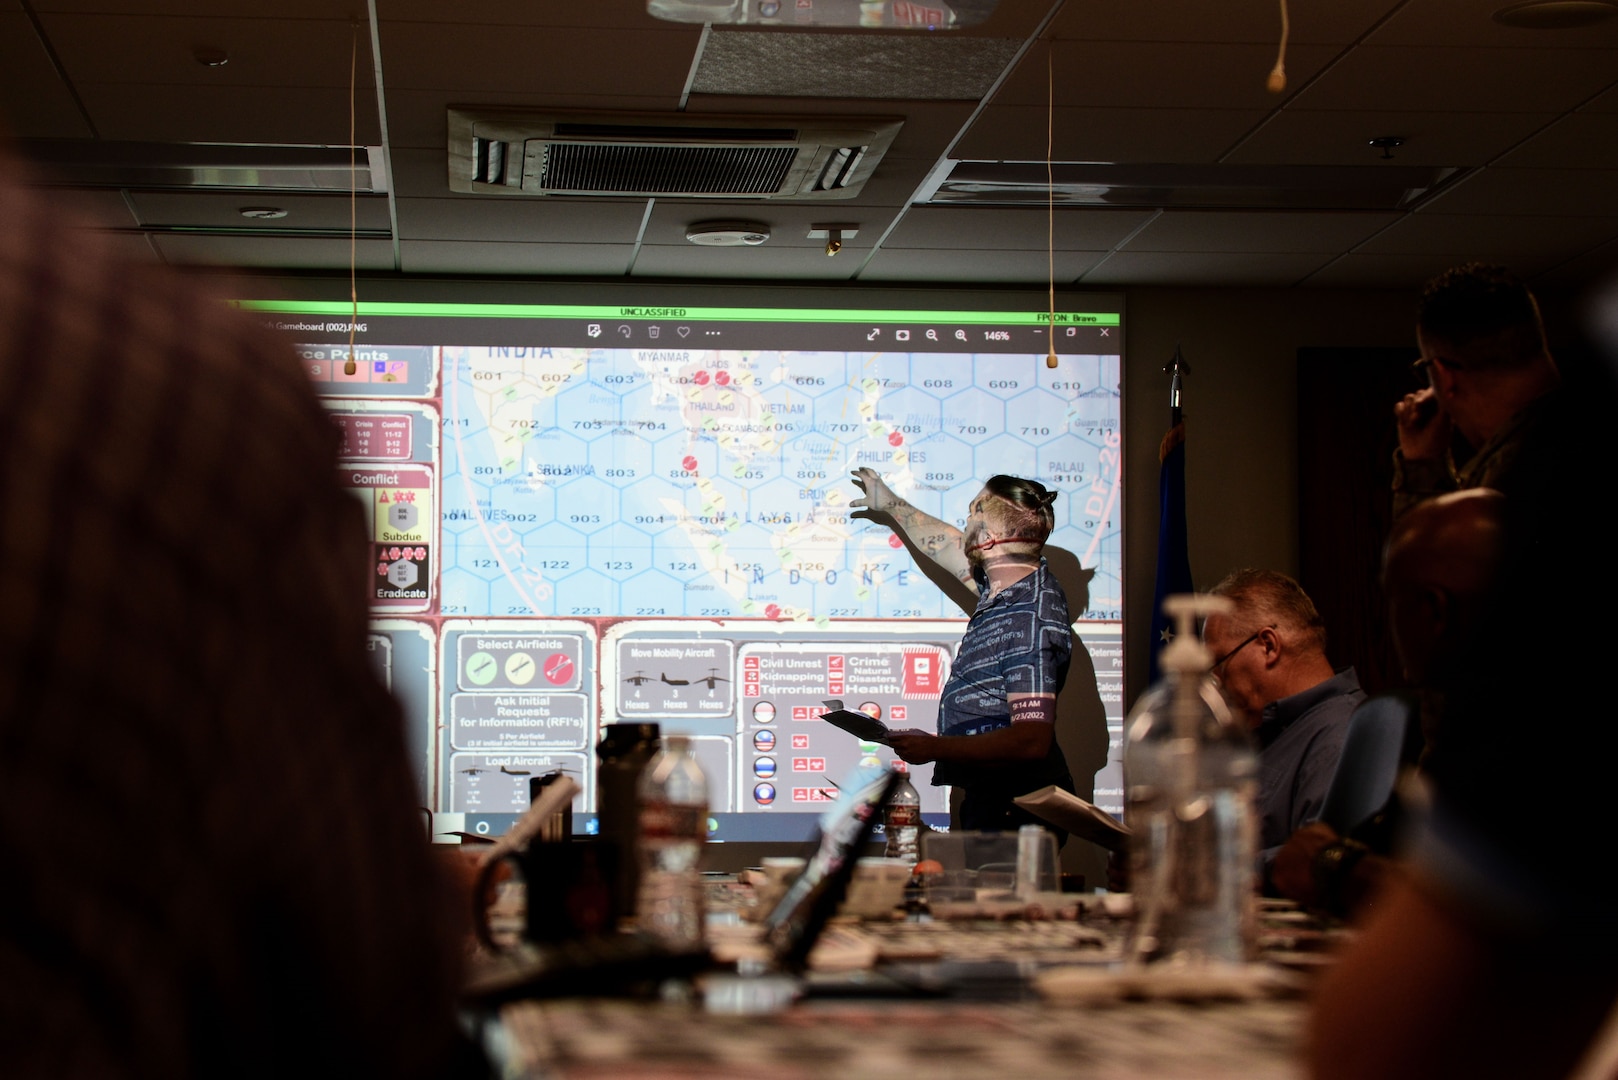 On August 23, 2022, three HQ AETC-based teams gathered to play Kingfish ACE at Joint Base San Antonio-Randolph, Texas. Using the ACE model, each team had to understand the relationships between task, threat, capabilities and timing in order to successfully plan for and deploy Multi-Capable Airmen